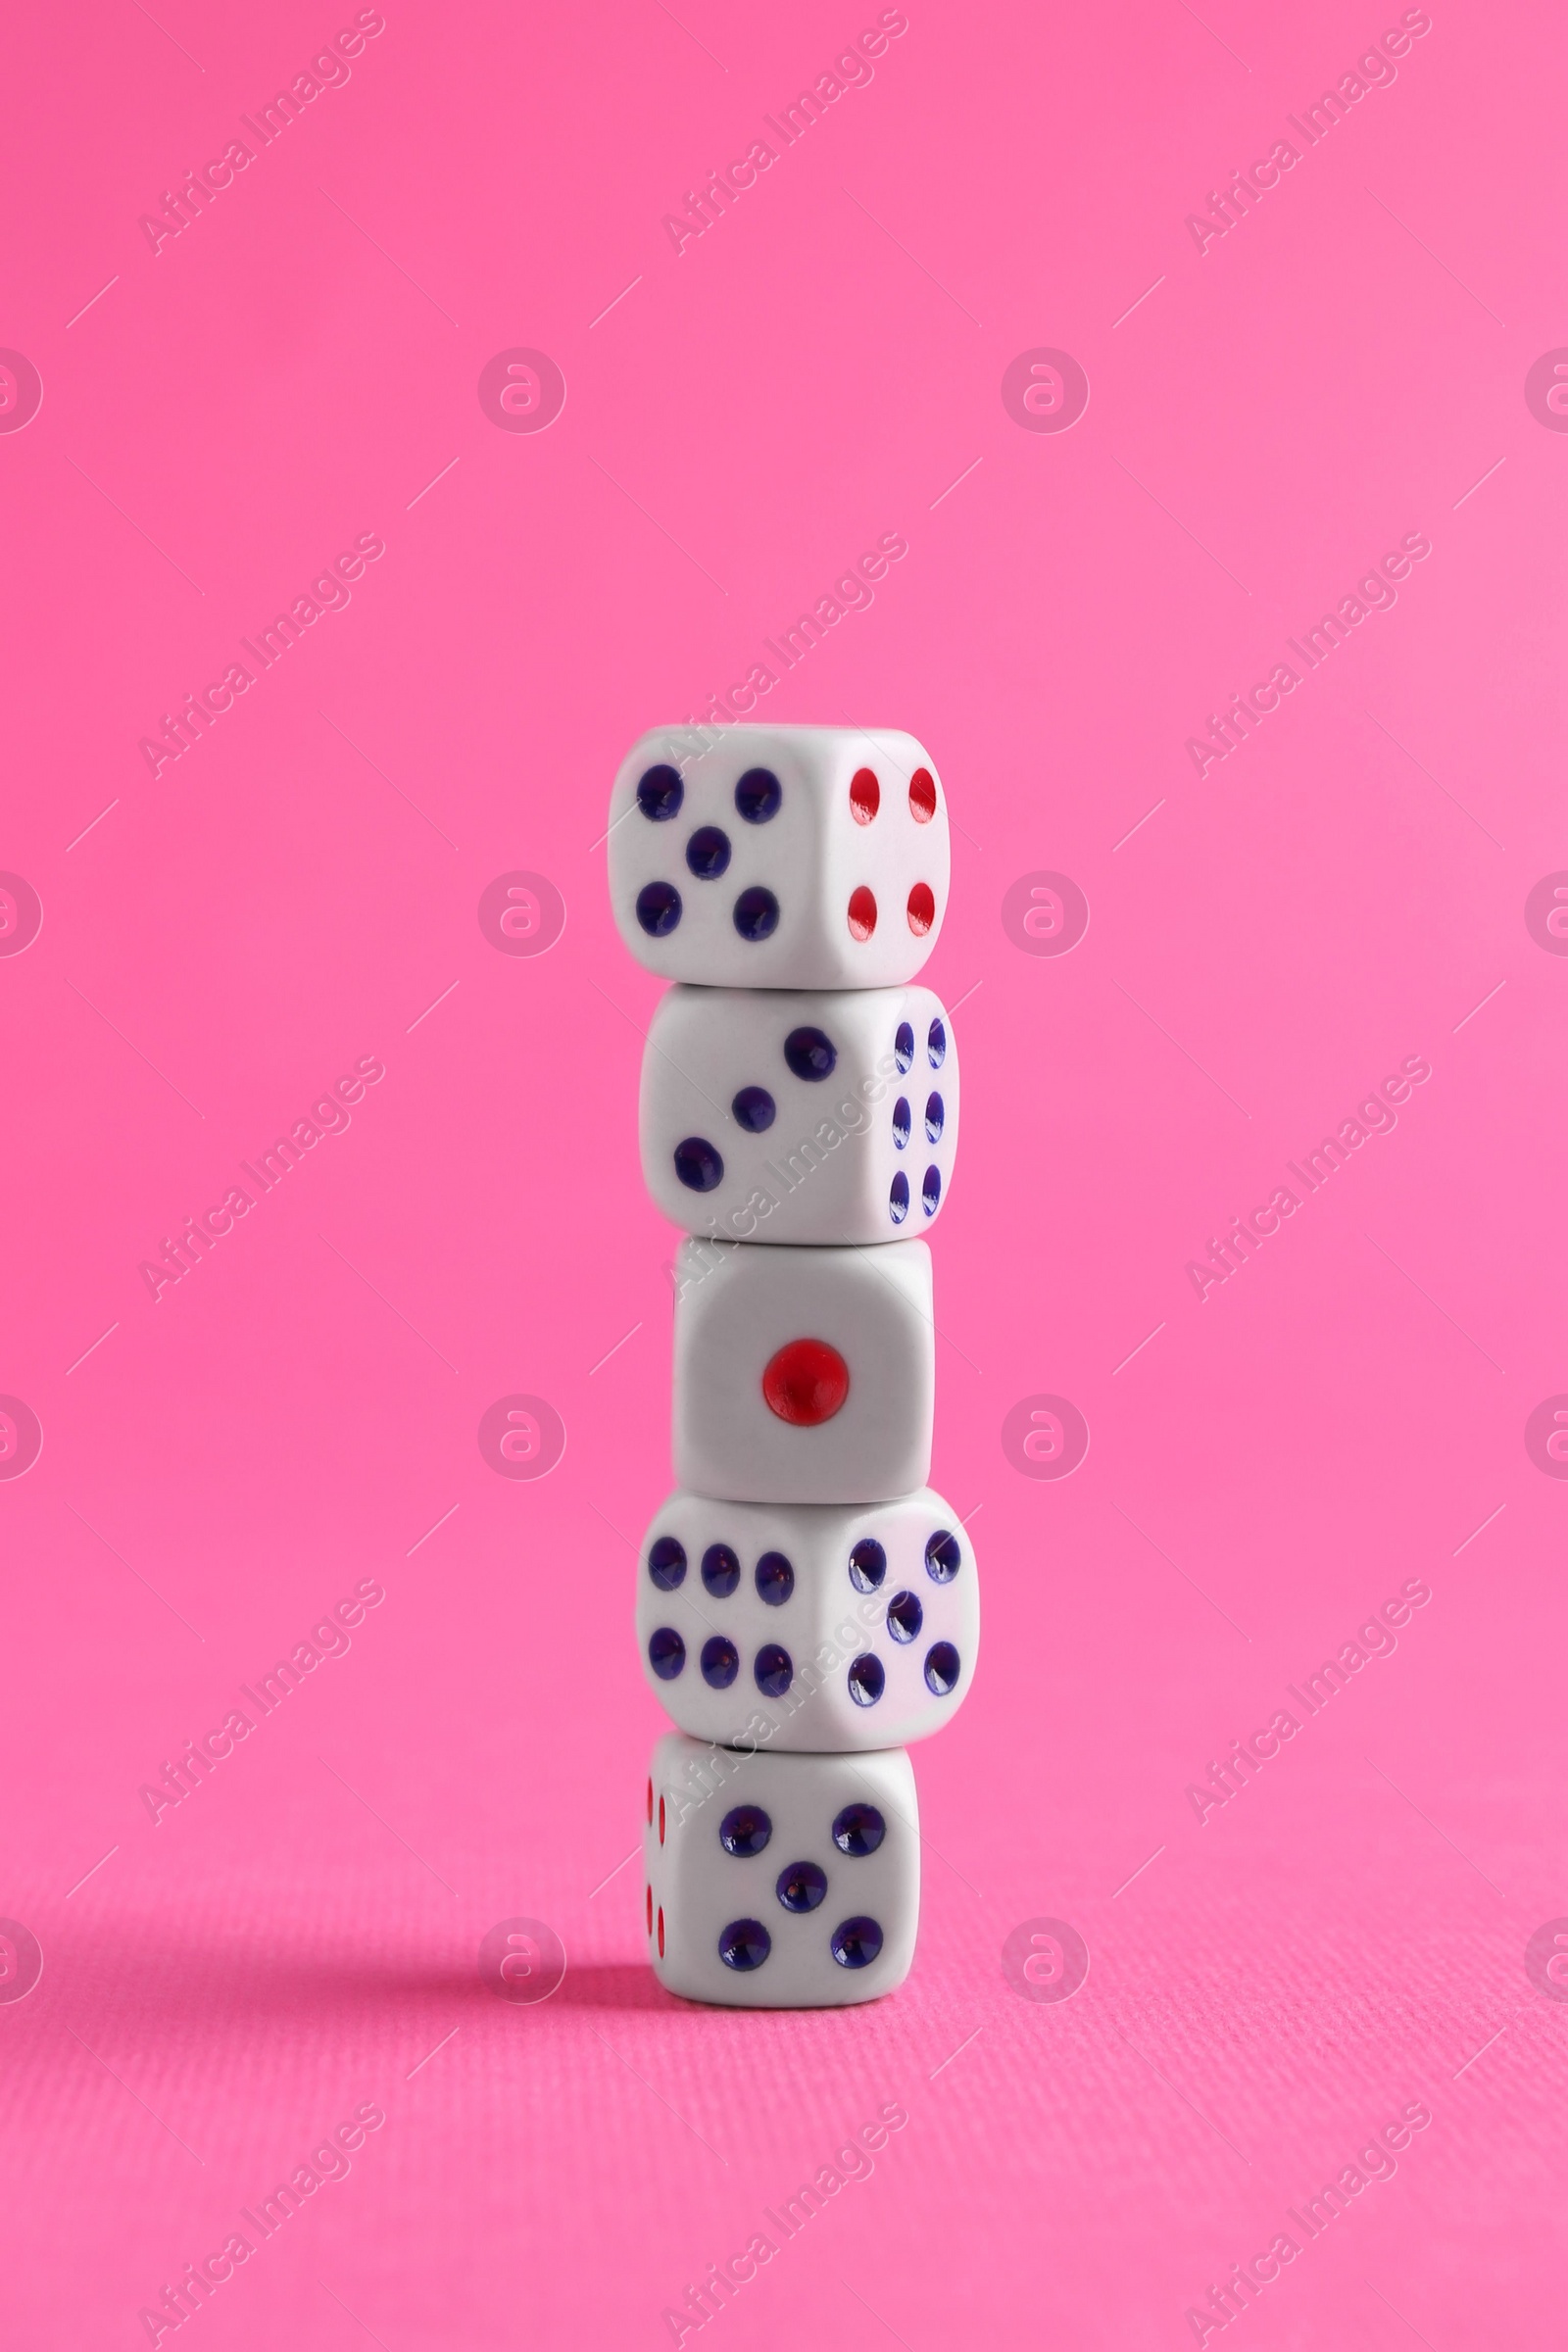 Photo of Many stacked game dices on pink background